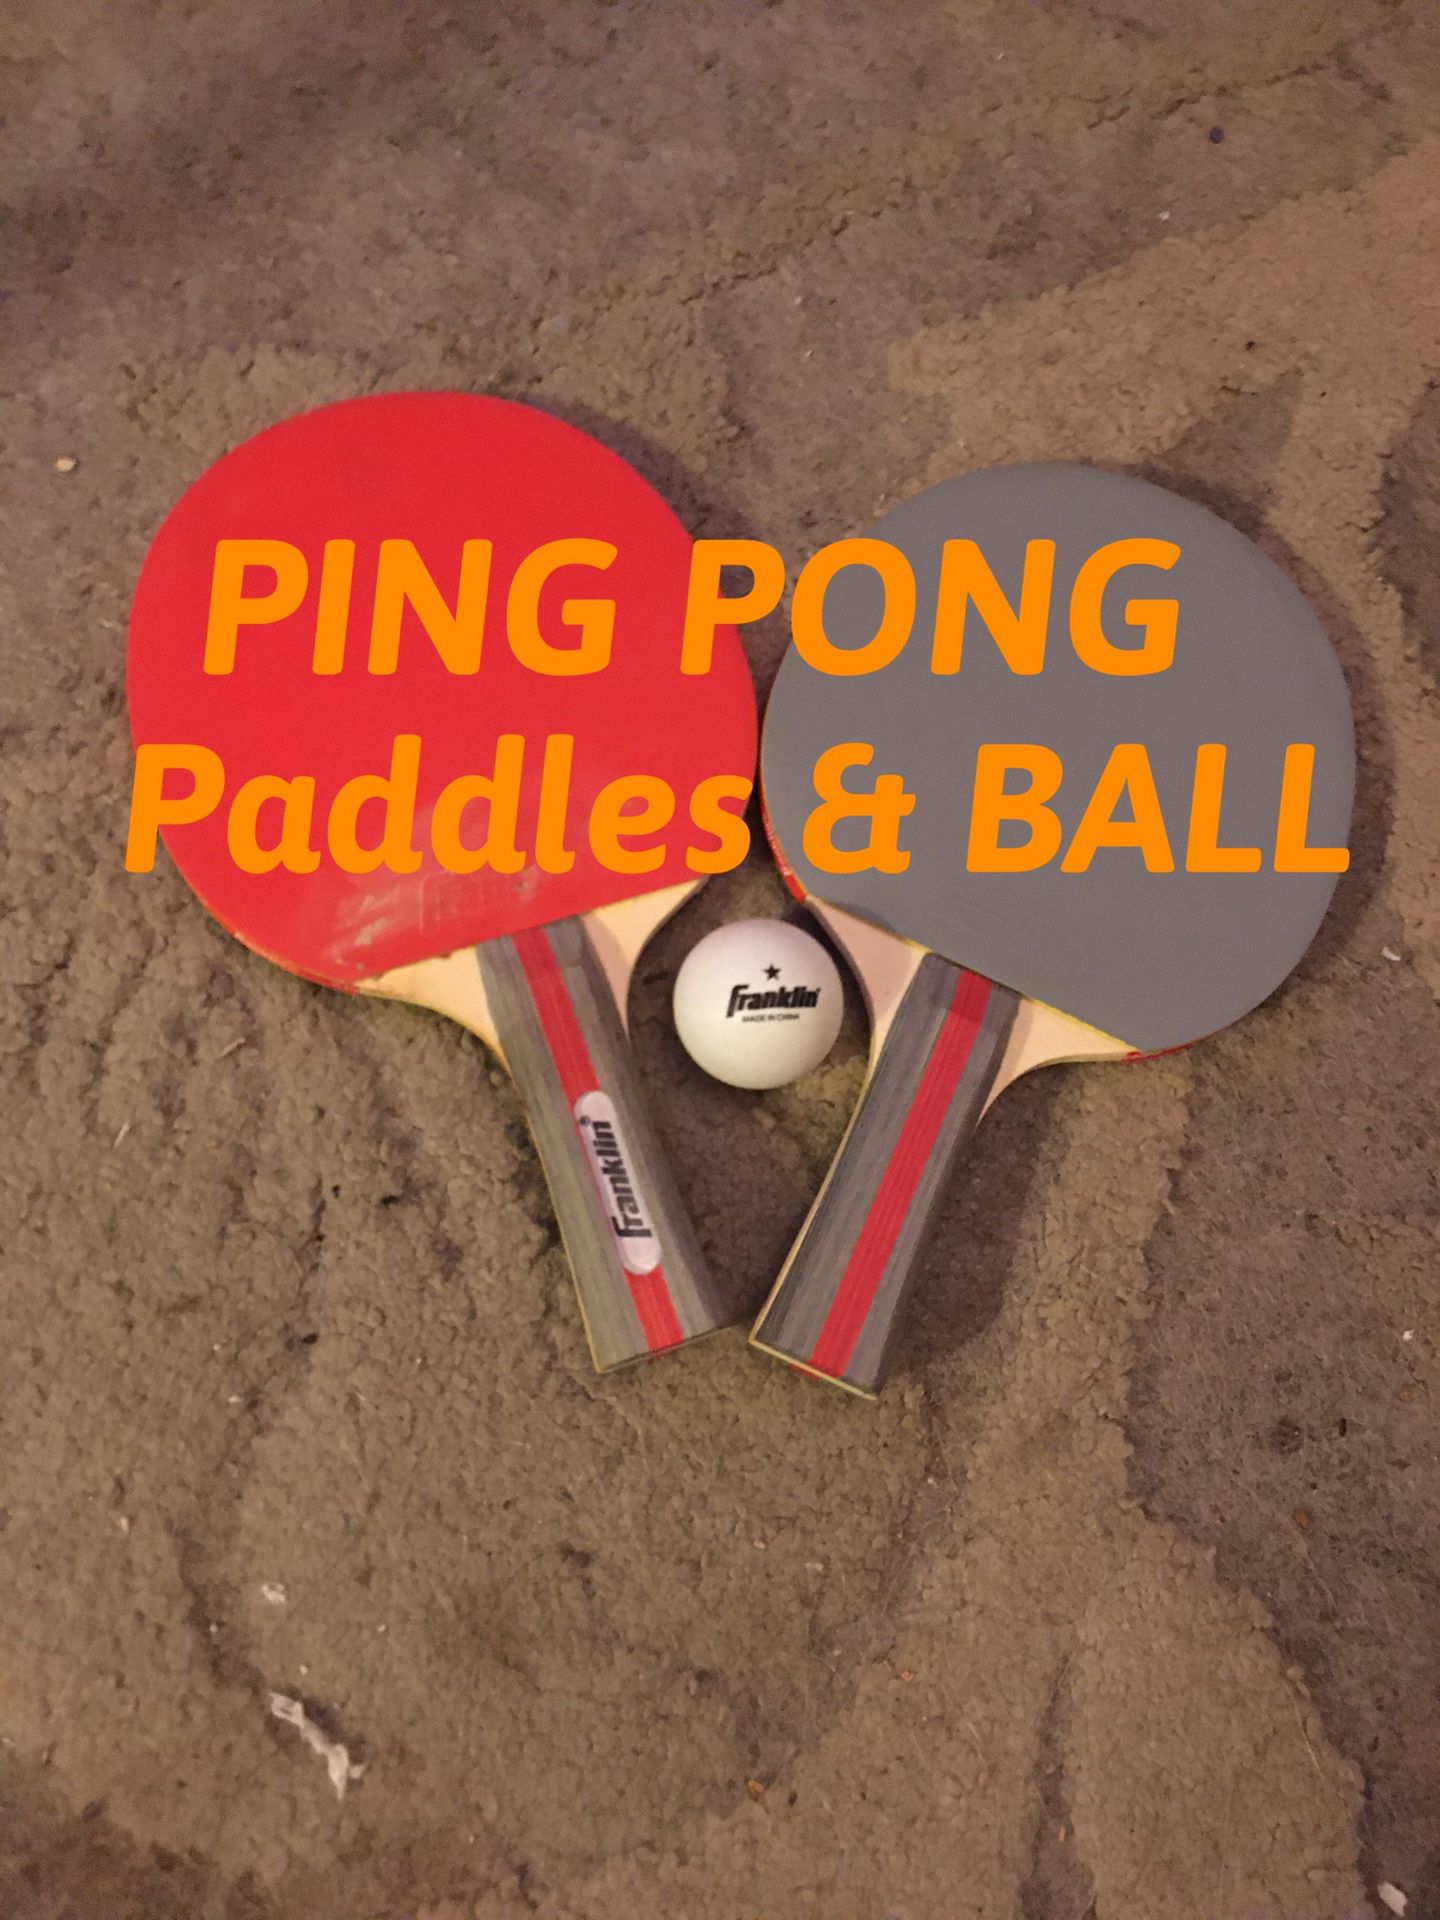 PAIR OF FRANKLIN BRAND PING PONG PADDLES & BALL